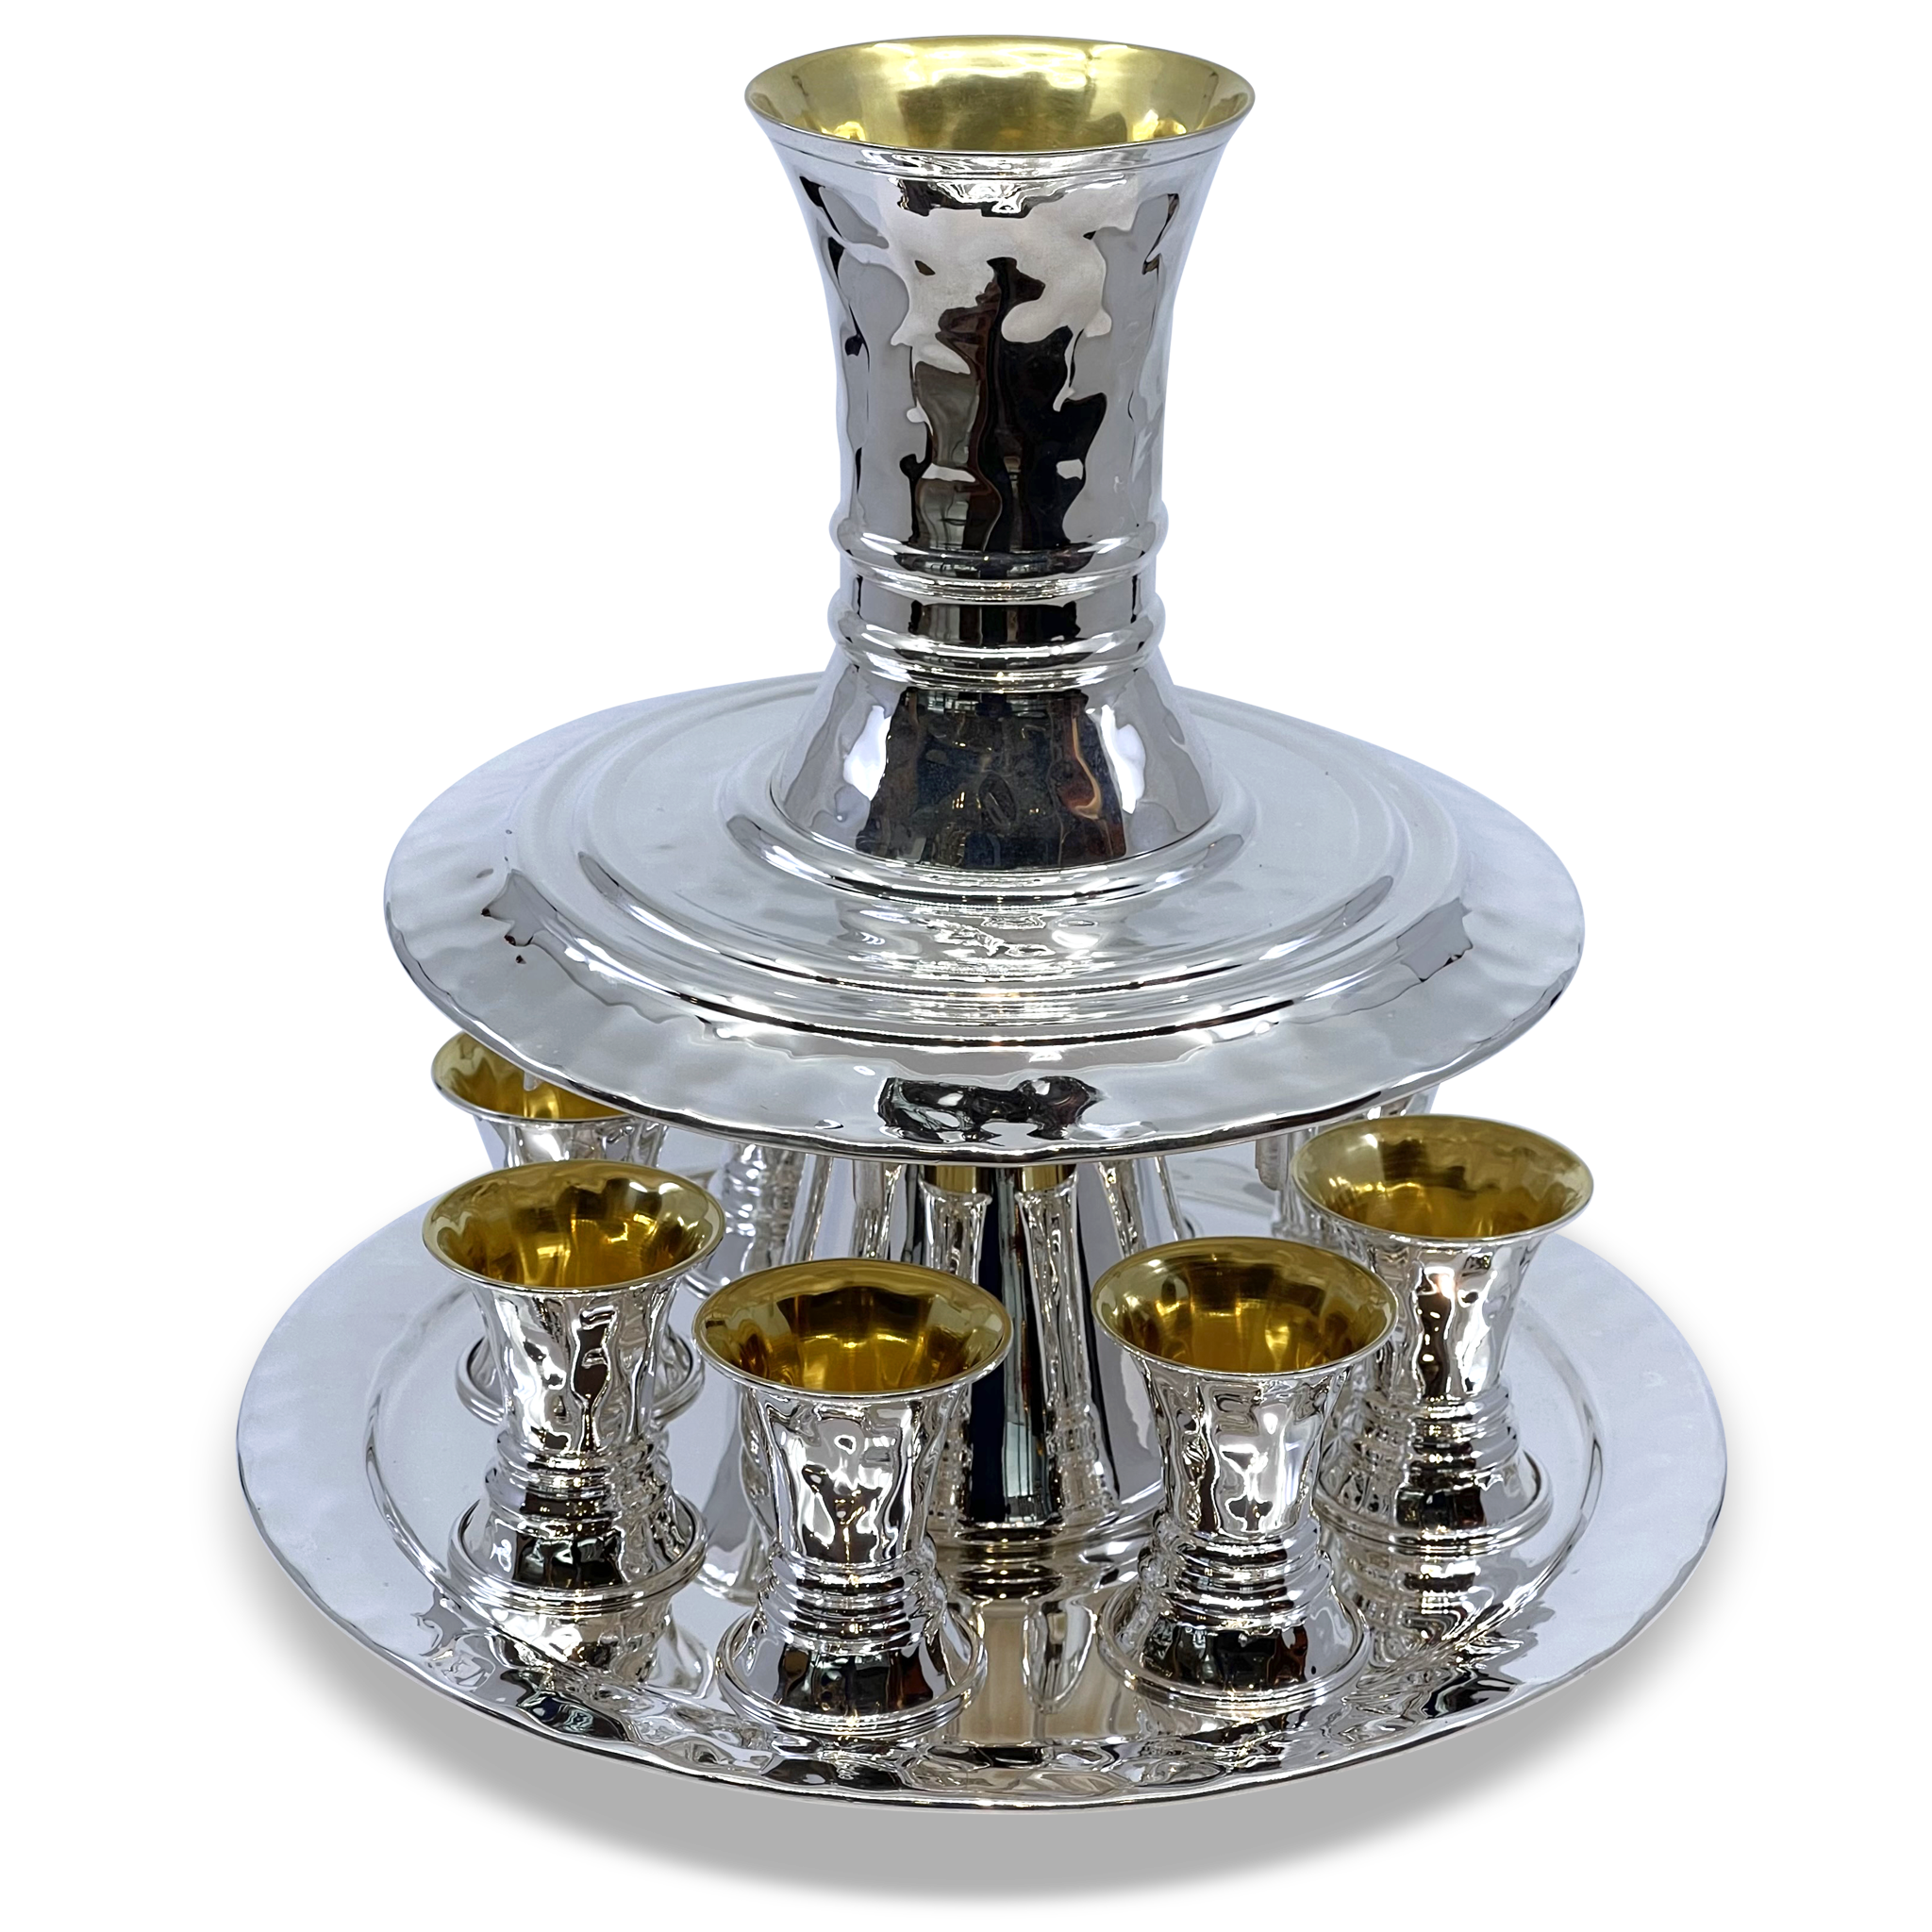 Hammered Silver Kiddush Fountain for 8 - Piece By Zion Hadad